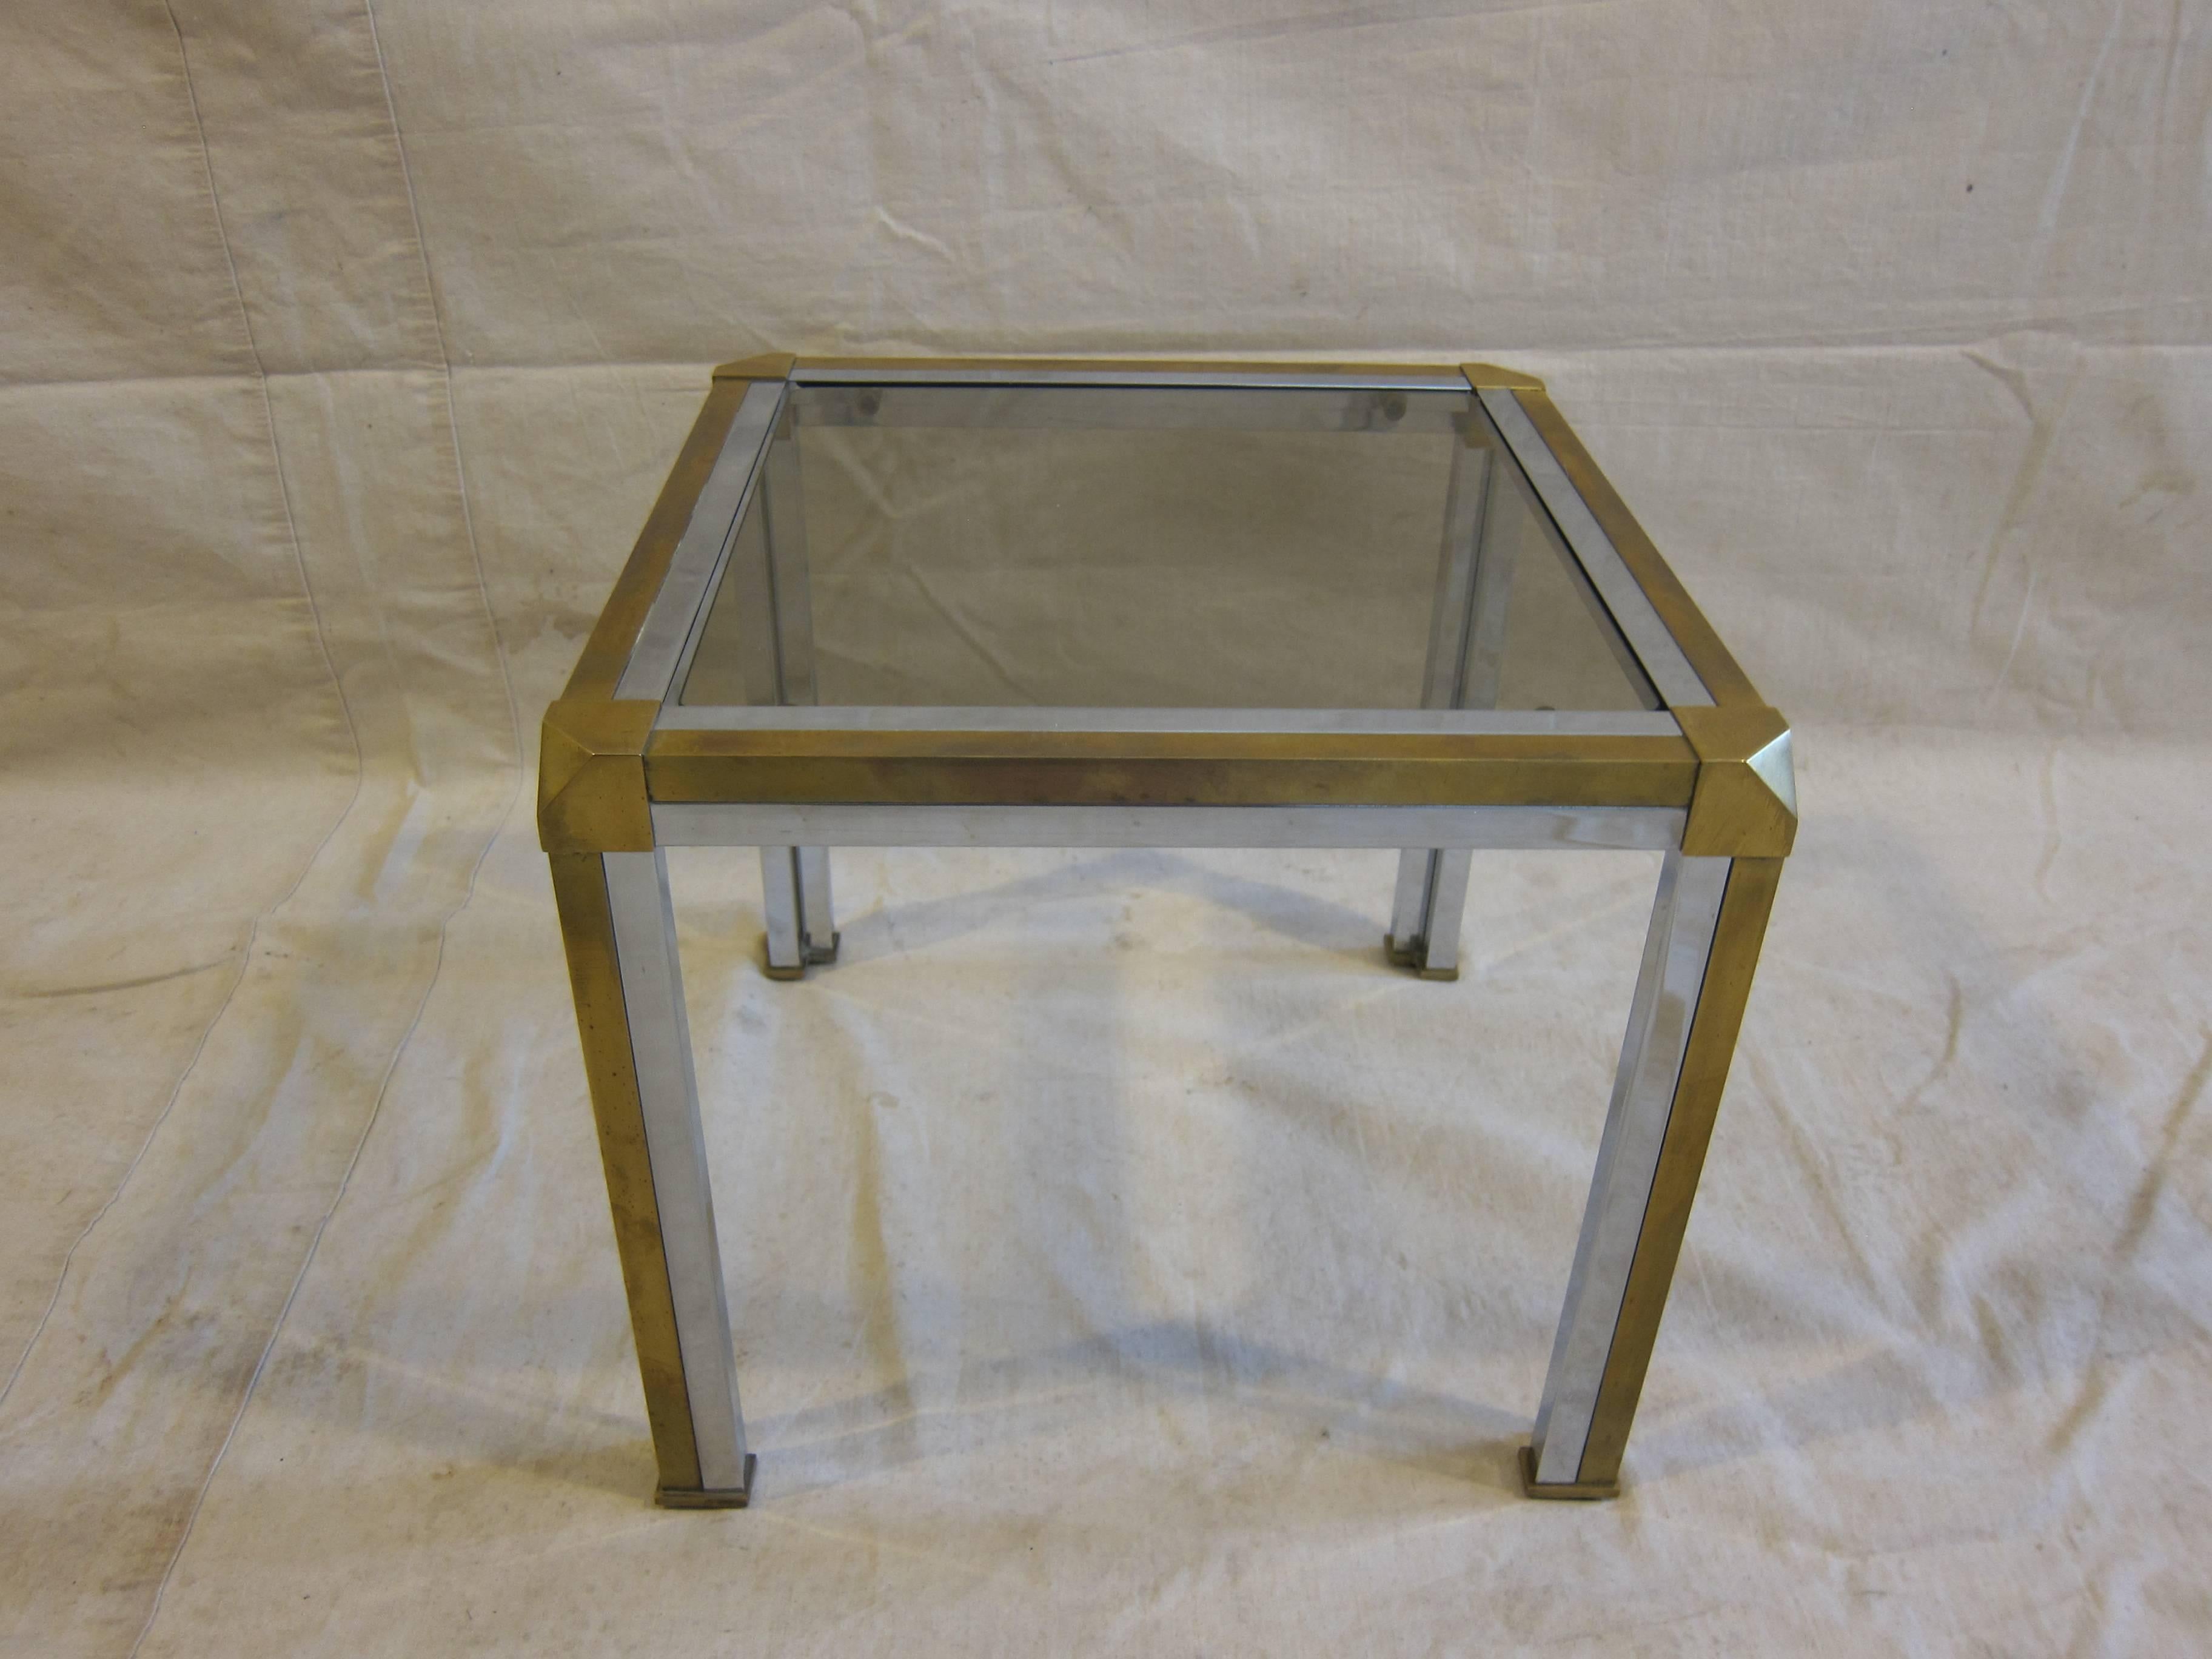 Midcentury Italian Brass and Chrome side table tinted glass attributed Romeo Rega.  Angled legs with turned down corners. In very good condition, brass has aged patina.  Heavy table with solid weight.  Great period piece.  